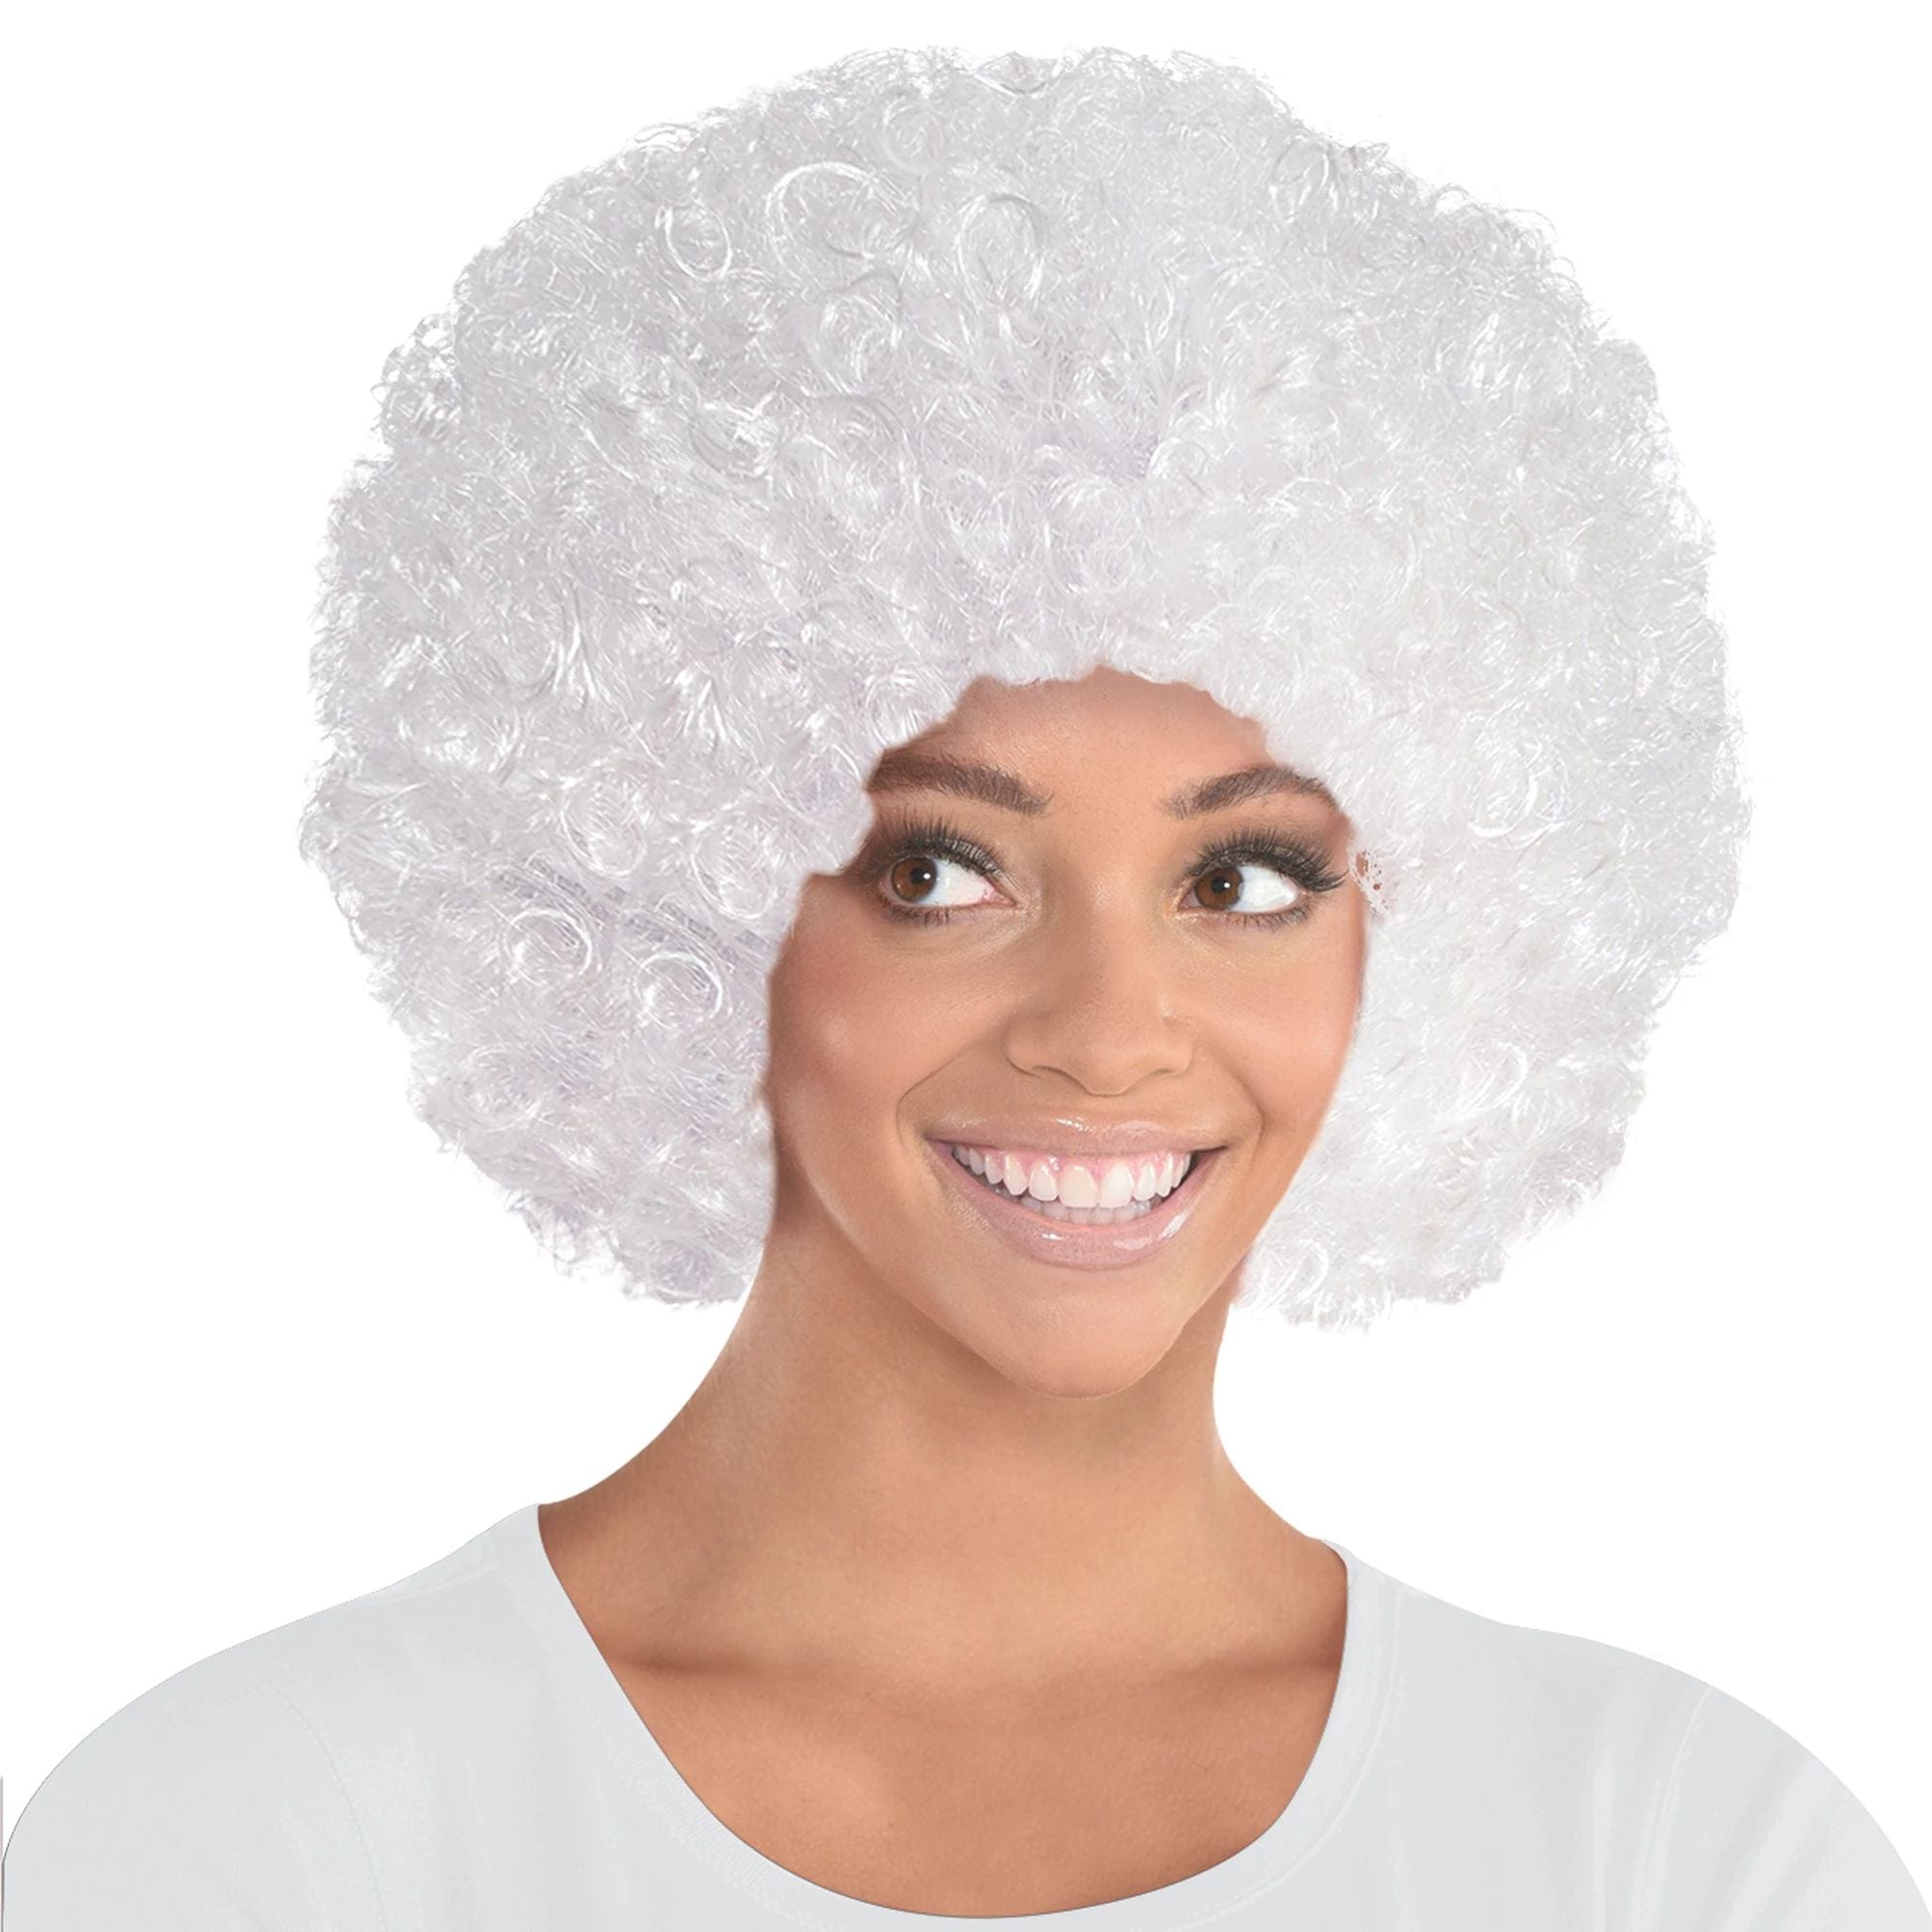 Amscan HOLIDAY: SPIRIT White Afro Curly Wig